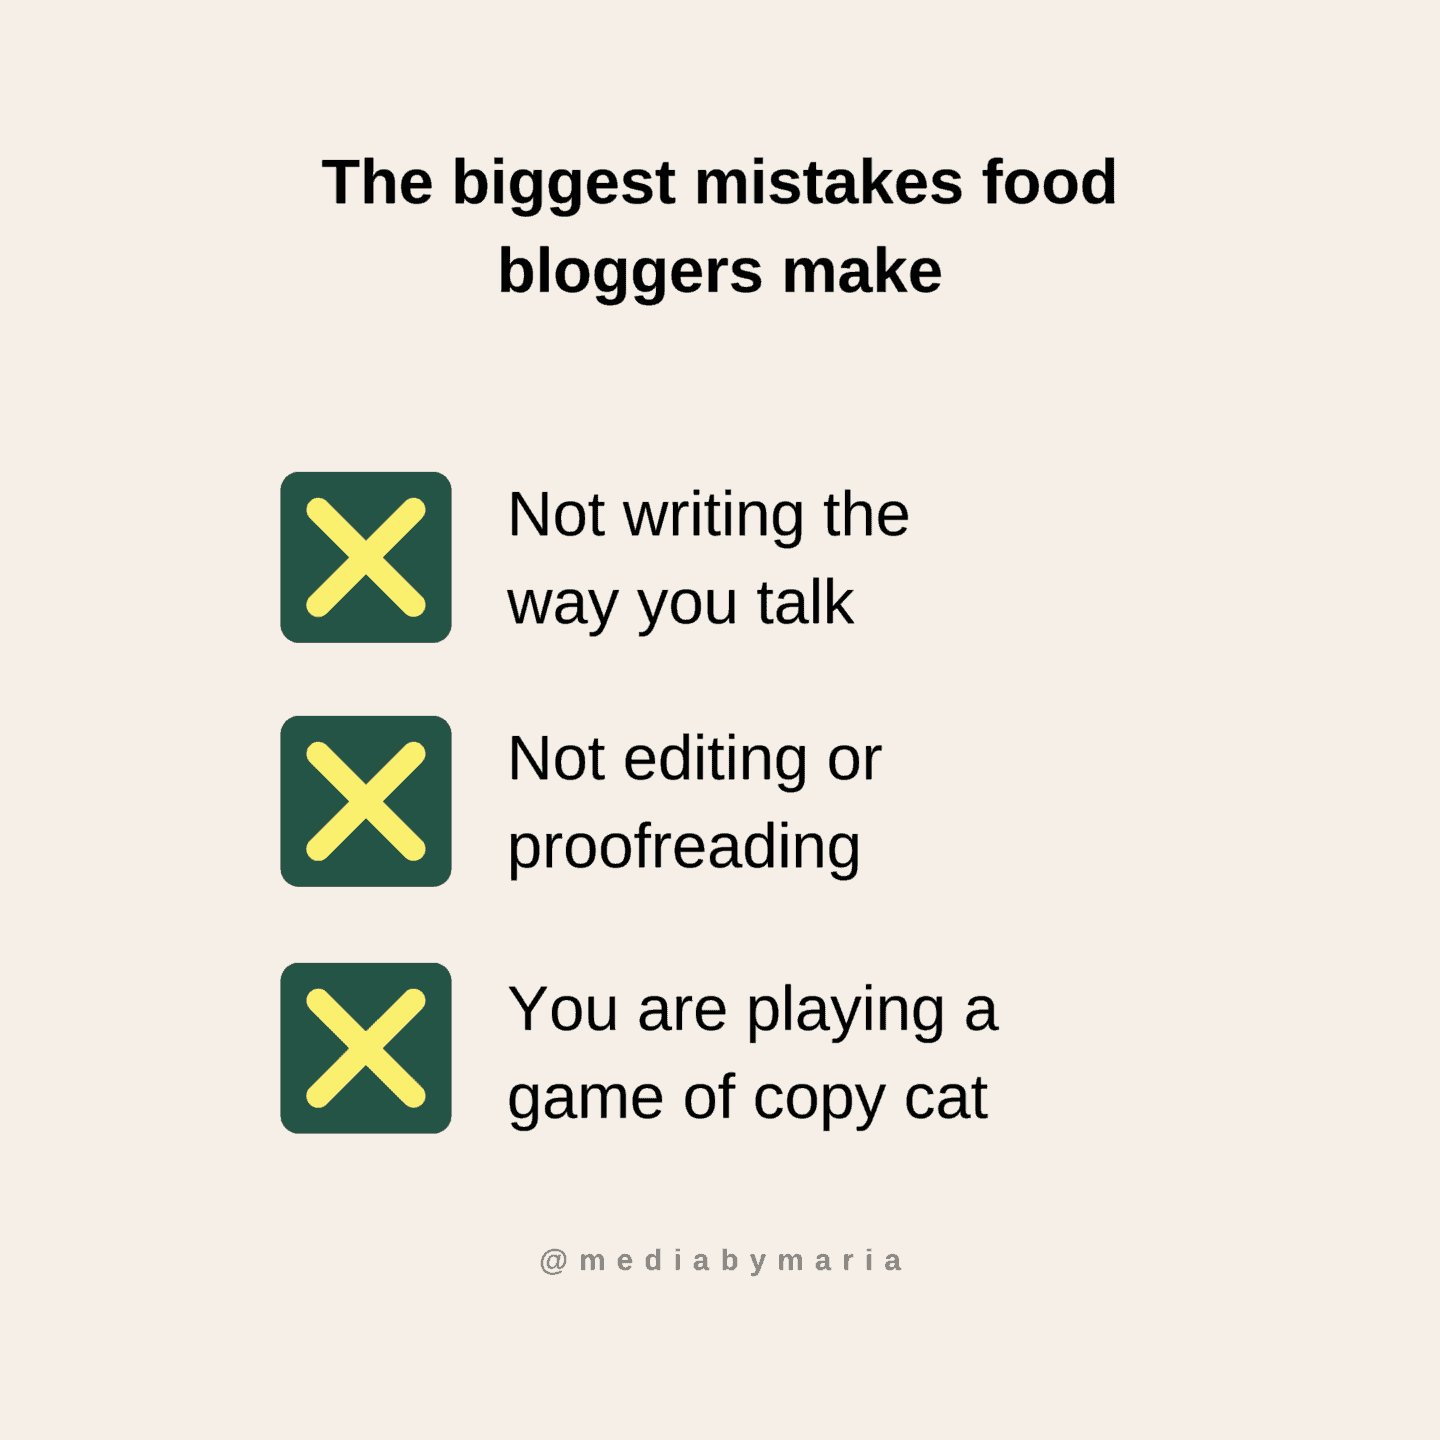 The biggest mistakes food bloggers make